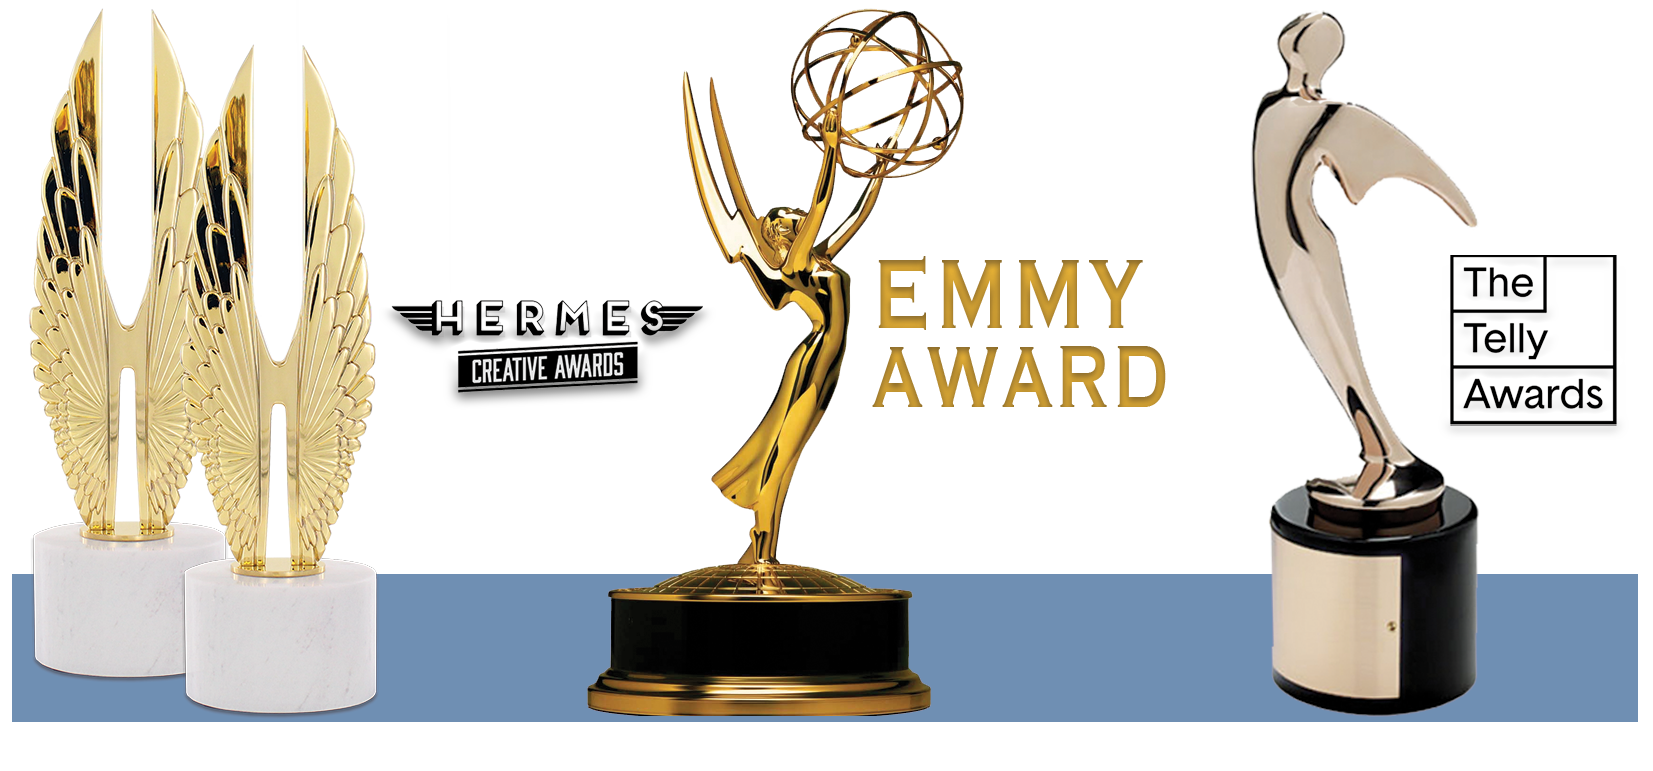 Emmy Awards PNG Immagini